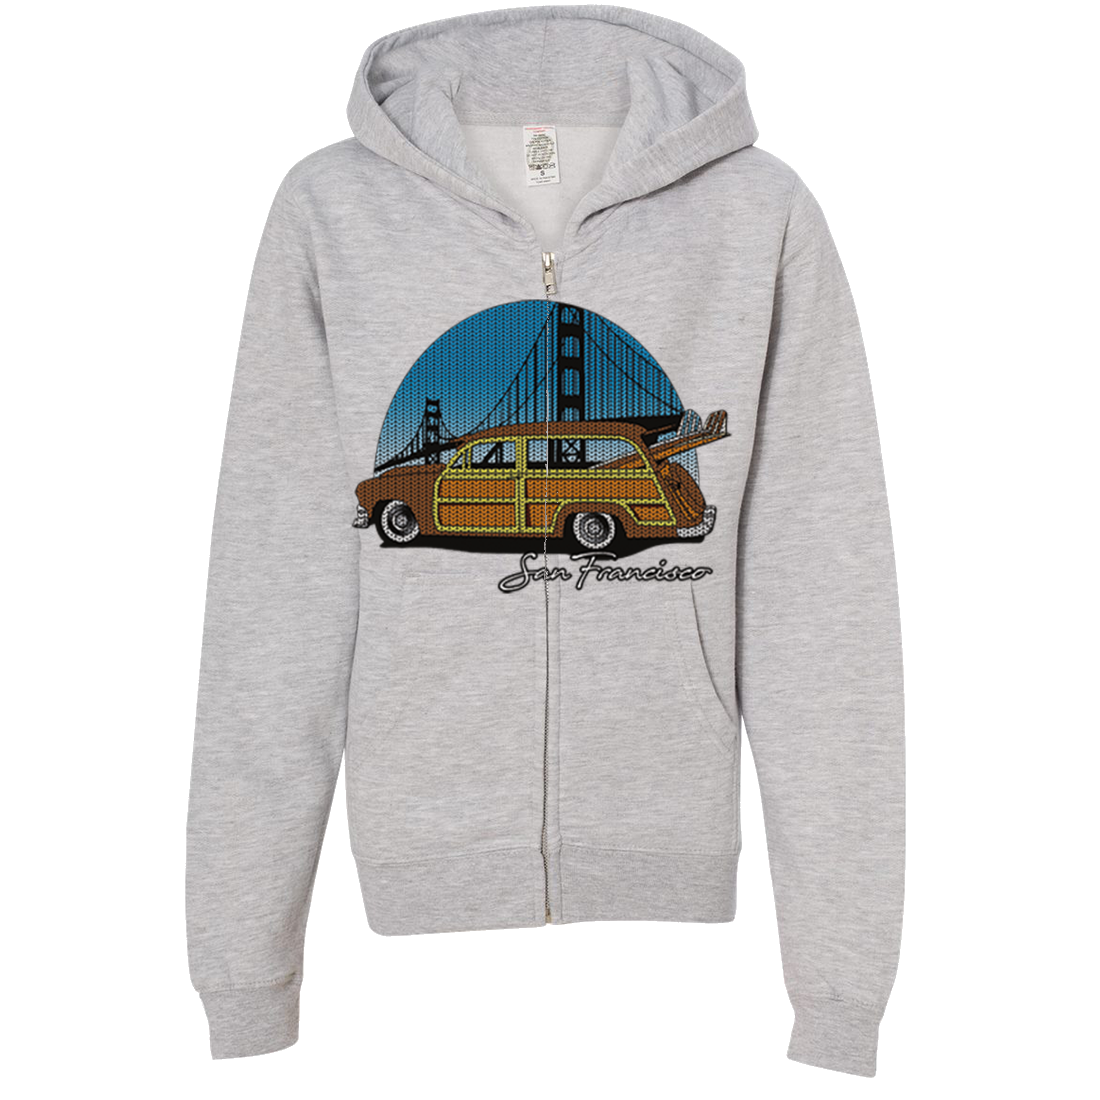 San Francisco Knit Style Woody Premium Youth Zip-Up Hoodie